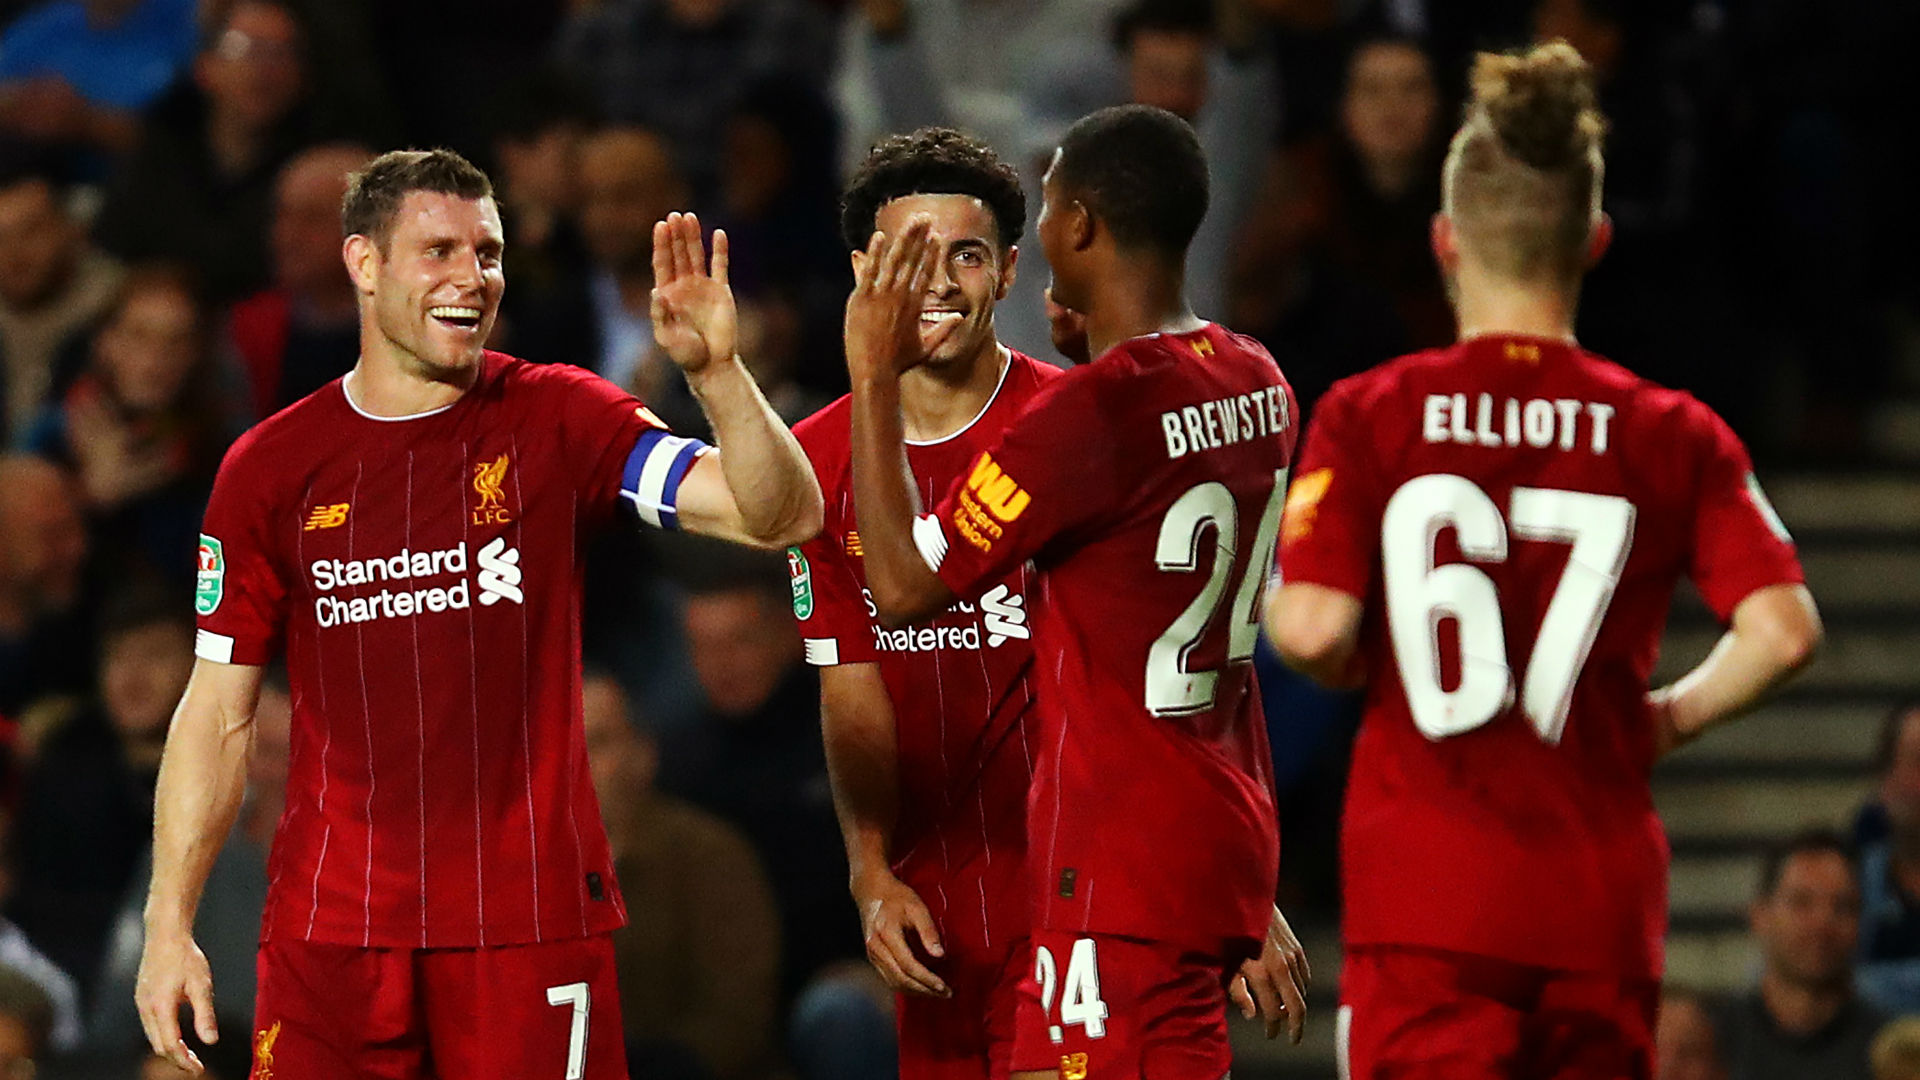 Liverpool expuled from the English League Cup- But why?